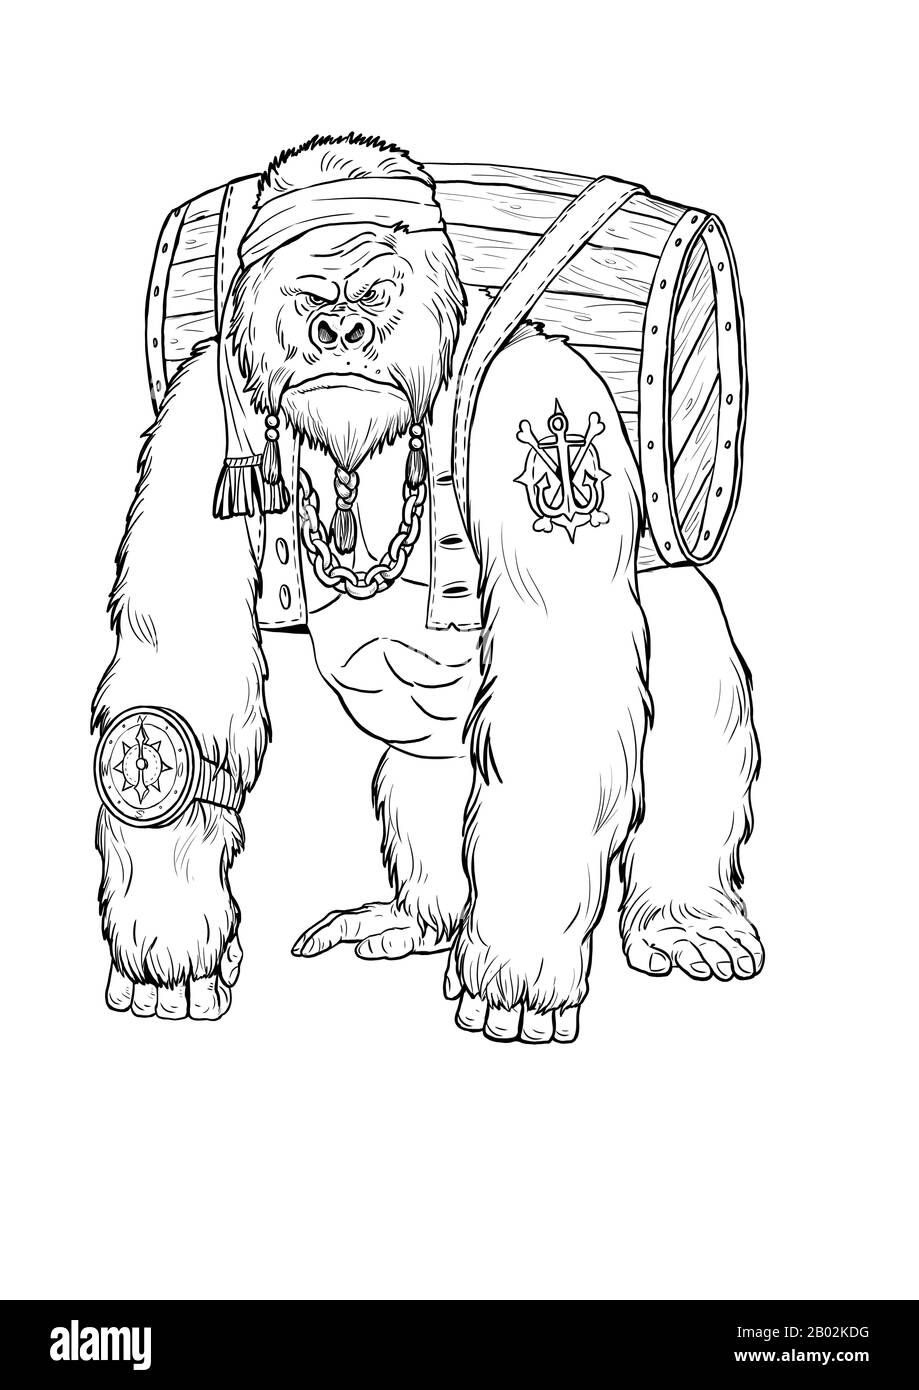 Big gorilla pirate coloring page. Outline clipart illustration. Monkey and apes pirates coloring sheet. Stock Photo